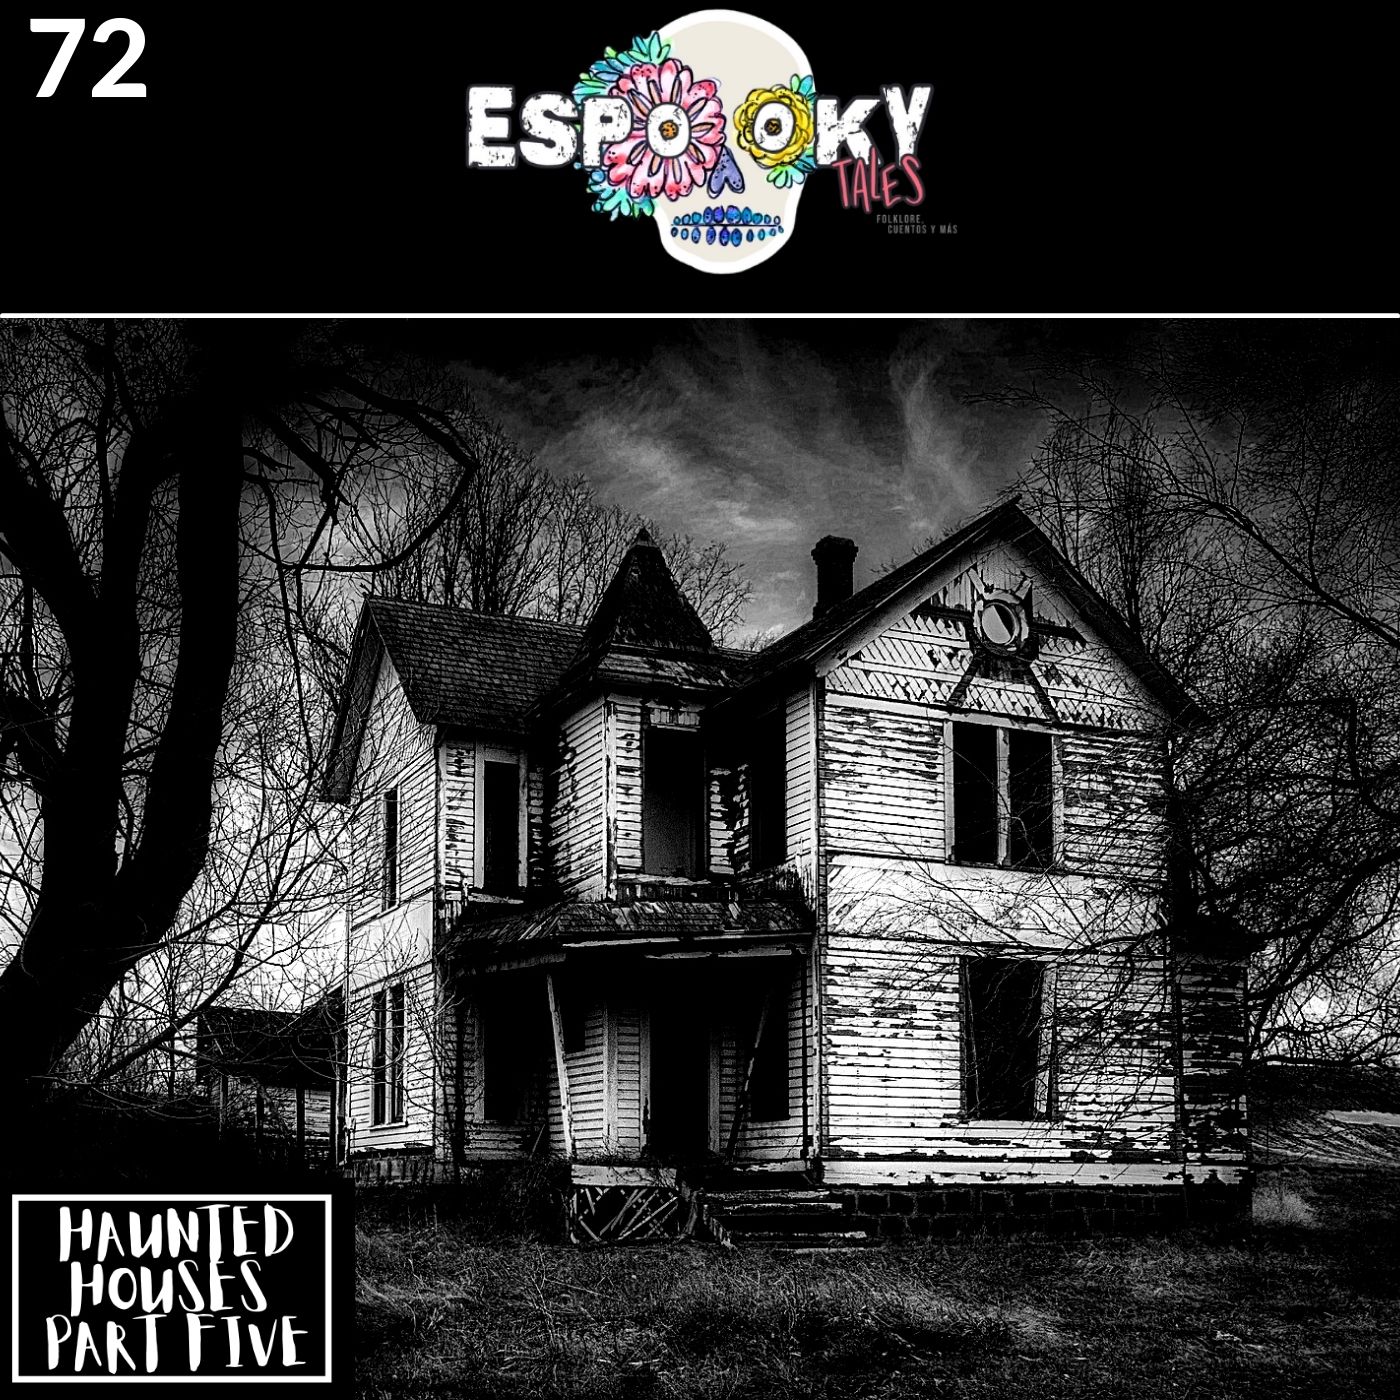 Haunted Houses Part Five with Letty of Lettylovesyou Image